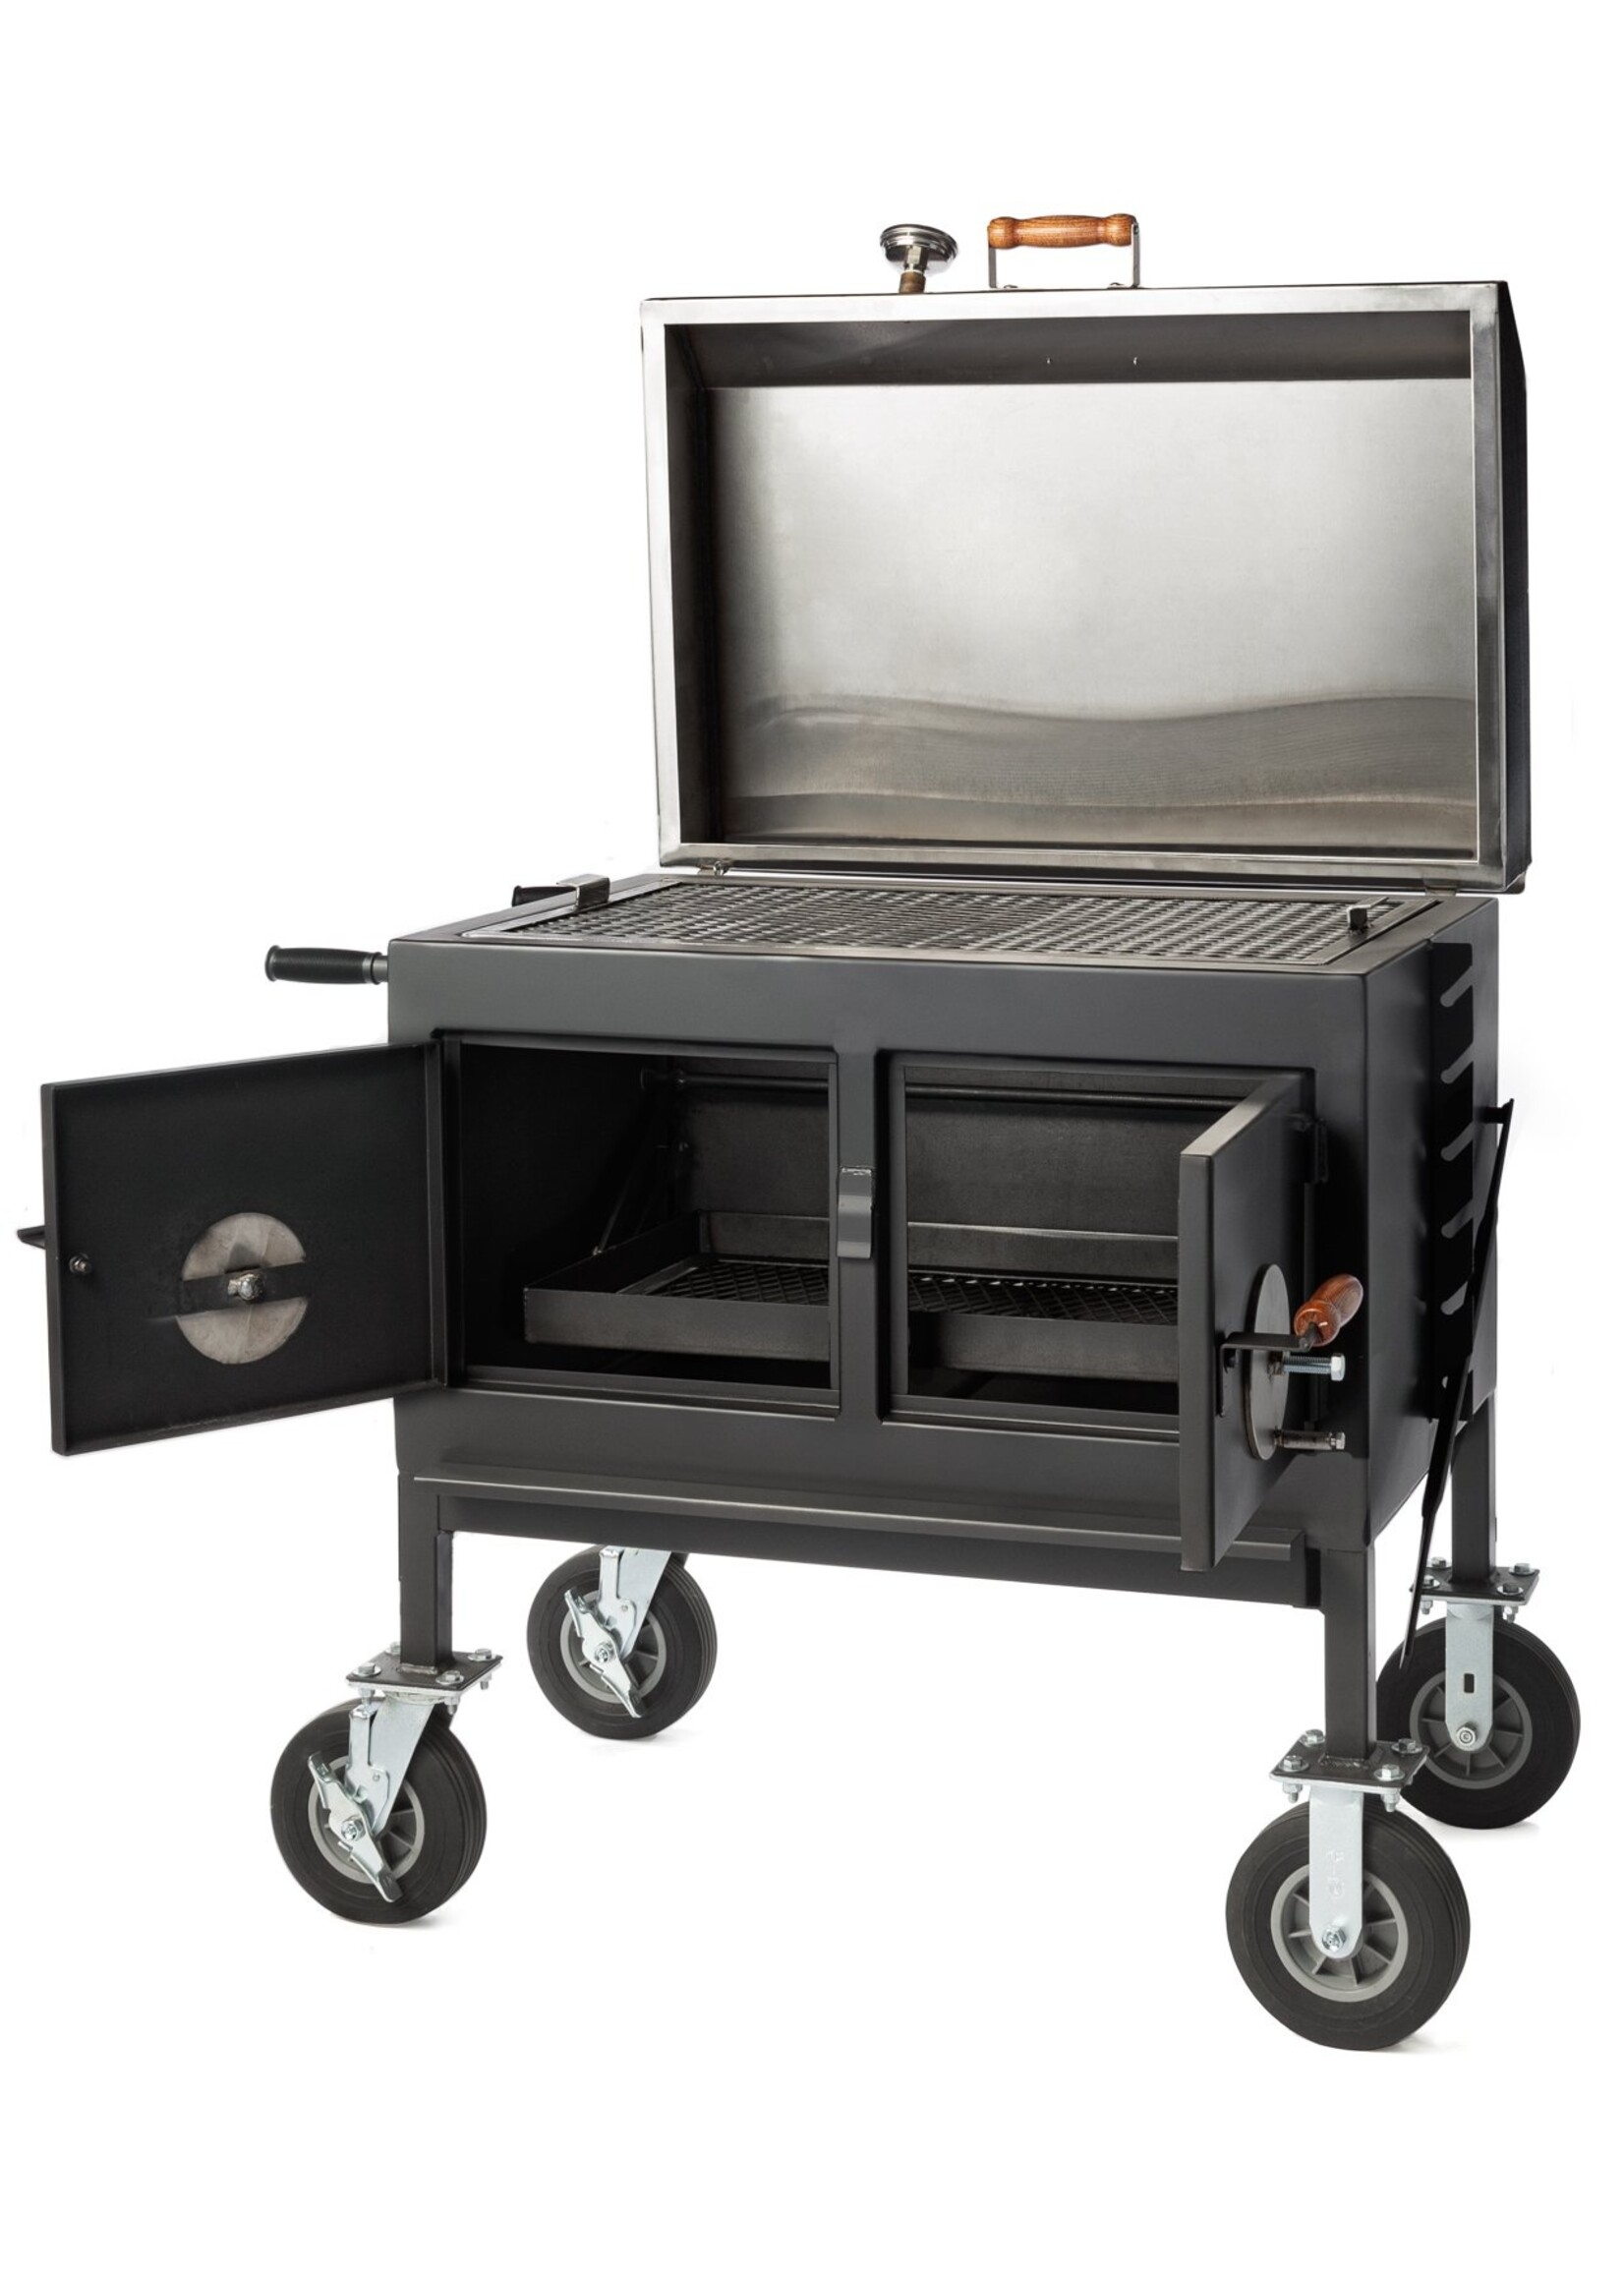 Pitts & Spitts Pitts & Spitts Charcoal Flat Top Grill